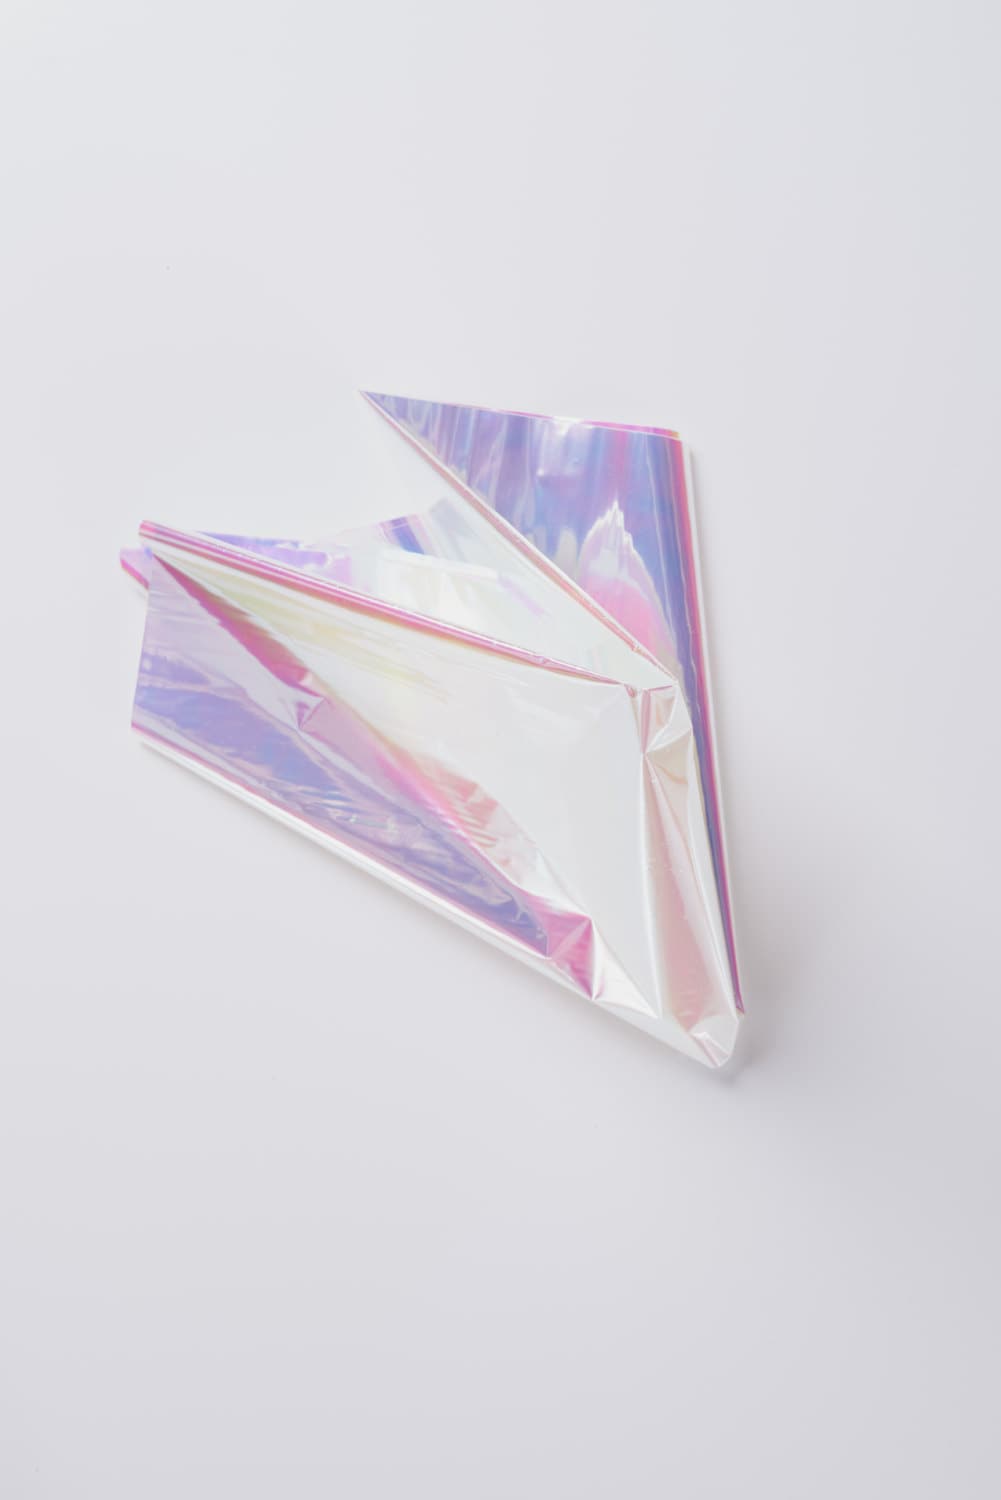 Iridescent Cello Sheets Pearlescent Cello Sheets Opal Mylar Holographic  Sheets Pearlized Cellophane 